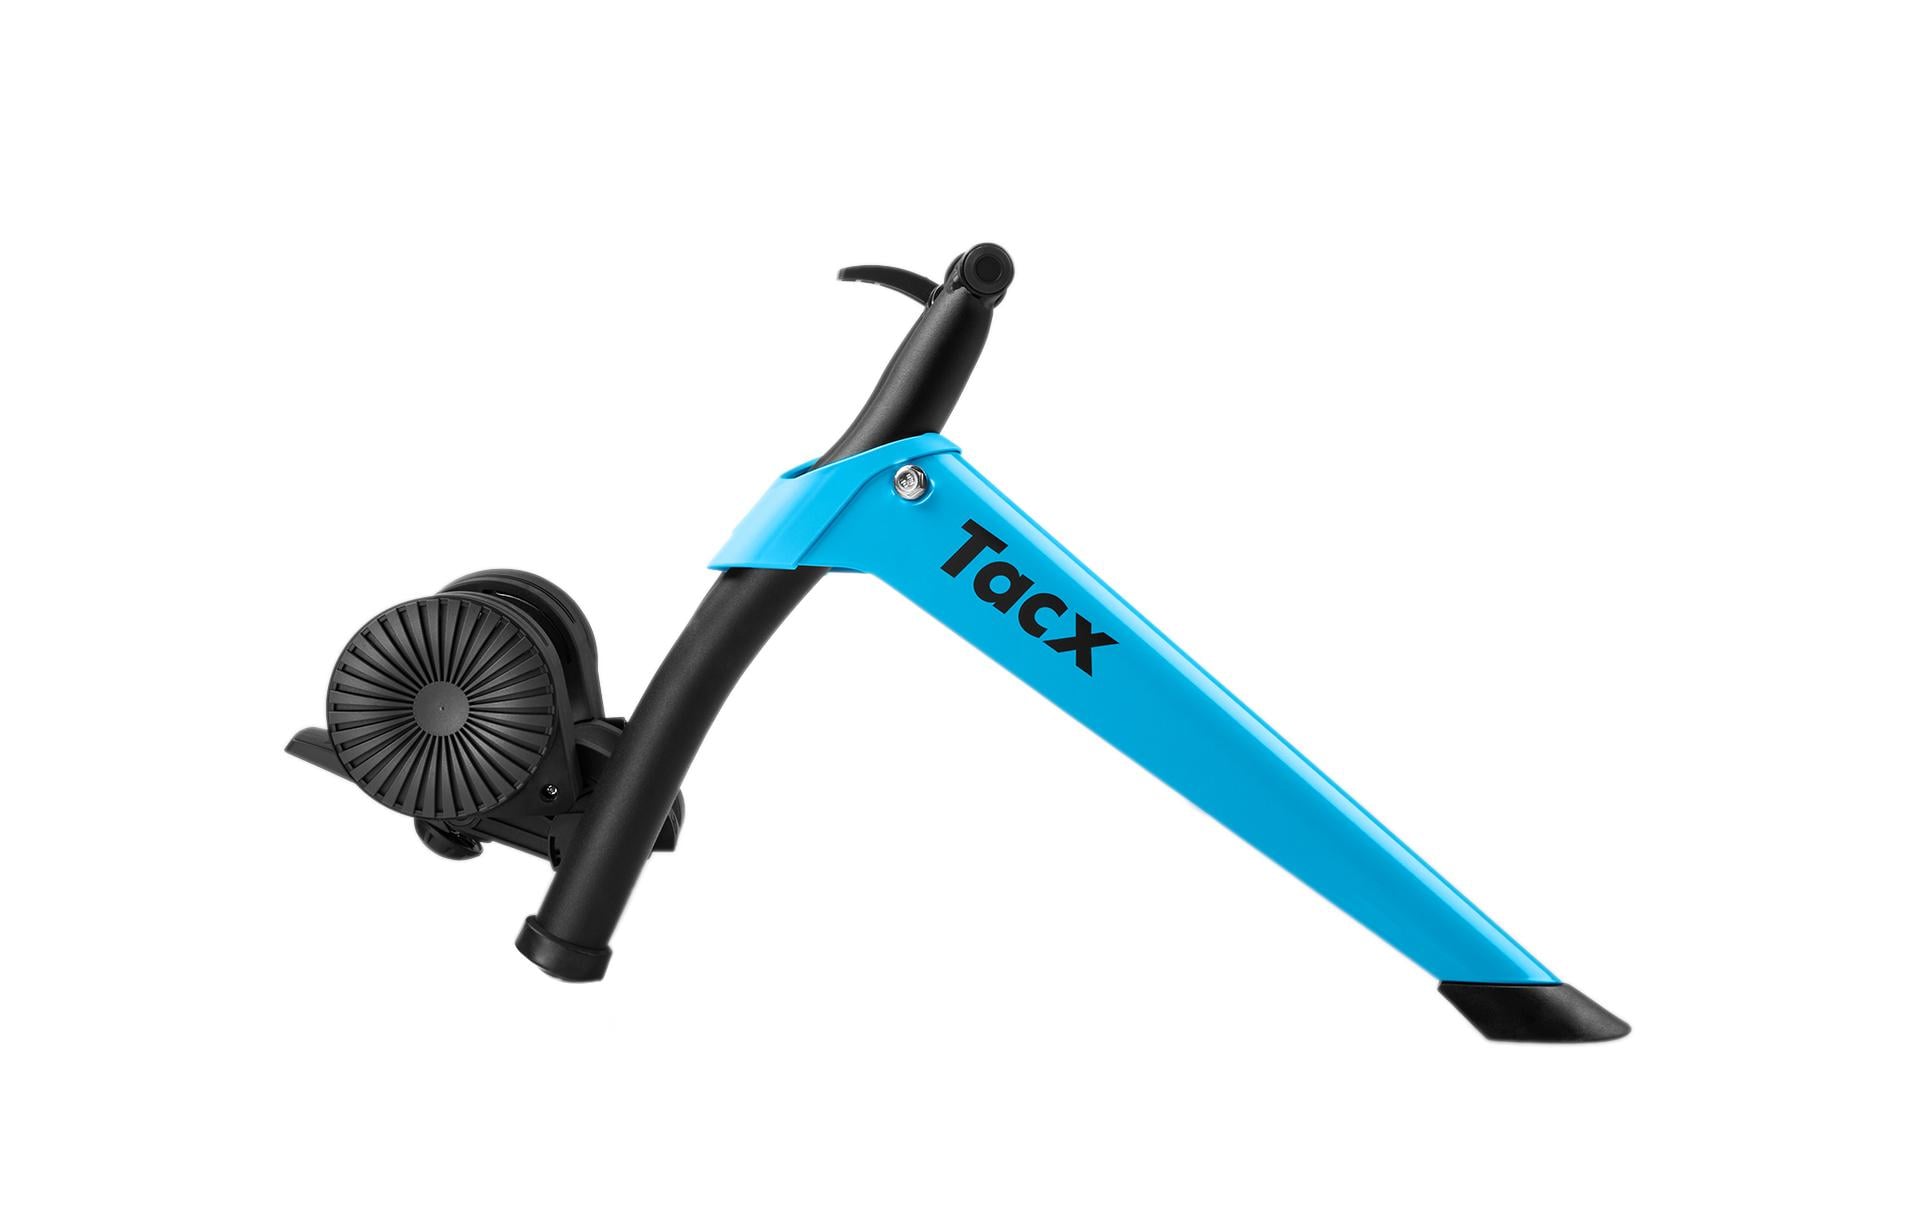 Tacx Rollentrainer Boost Magnet 1050 W